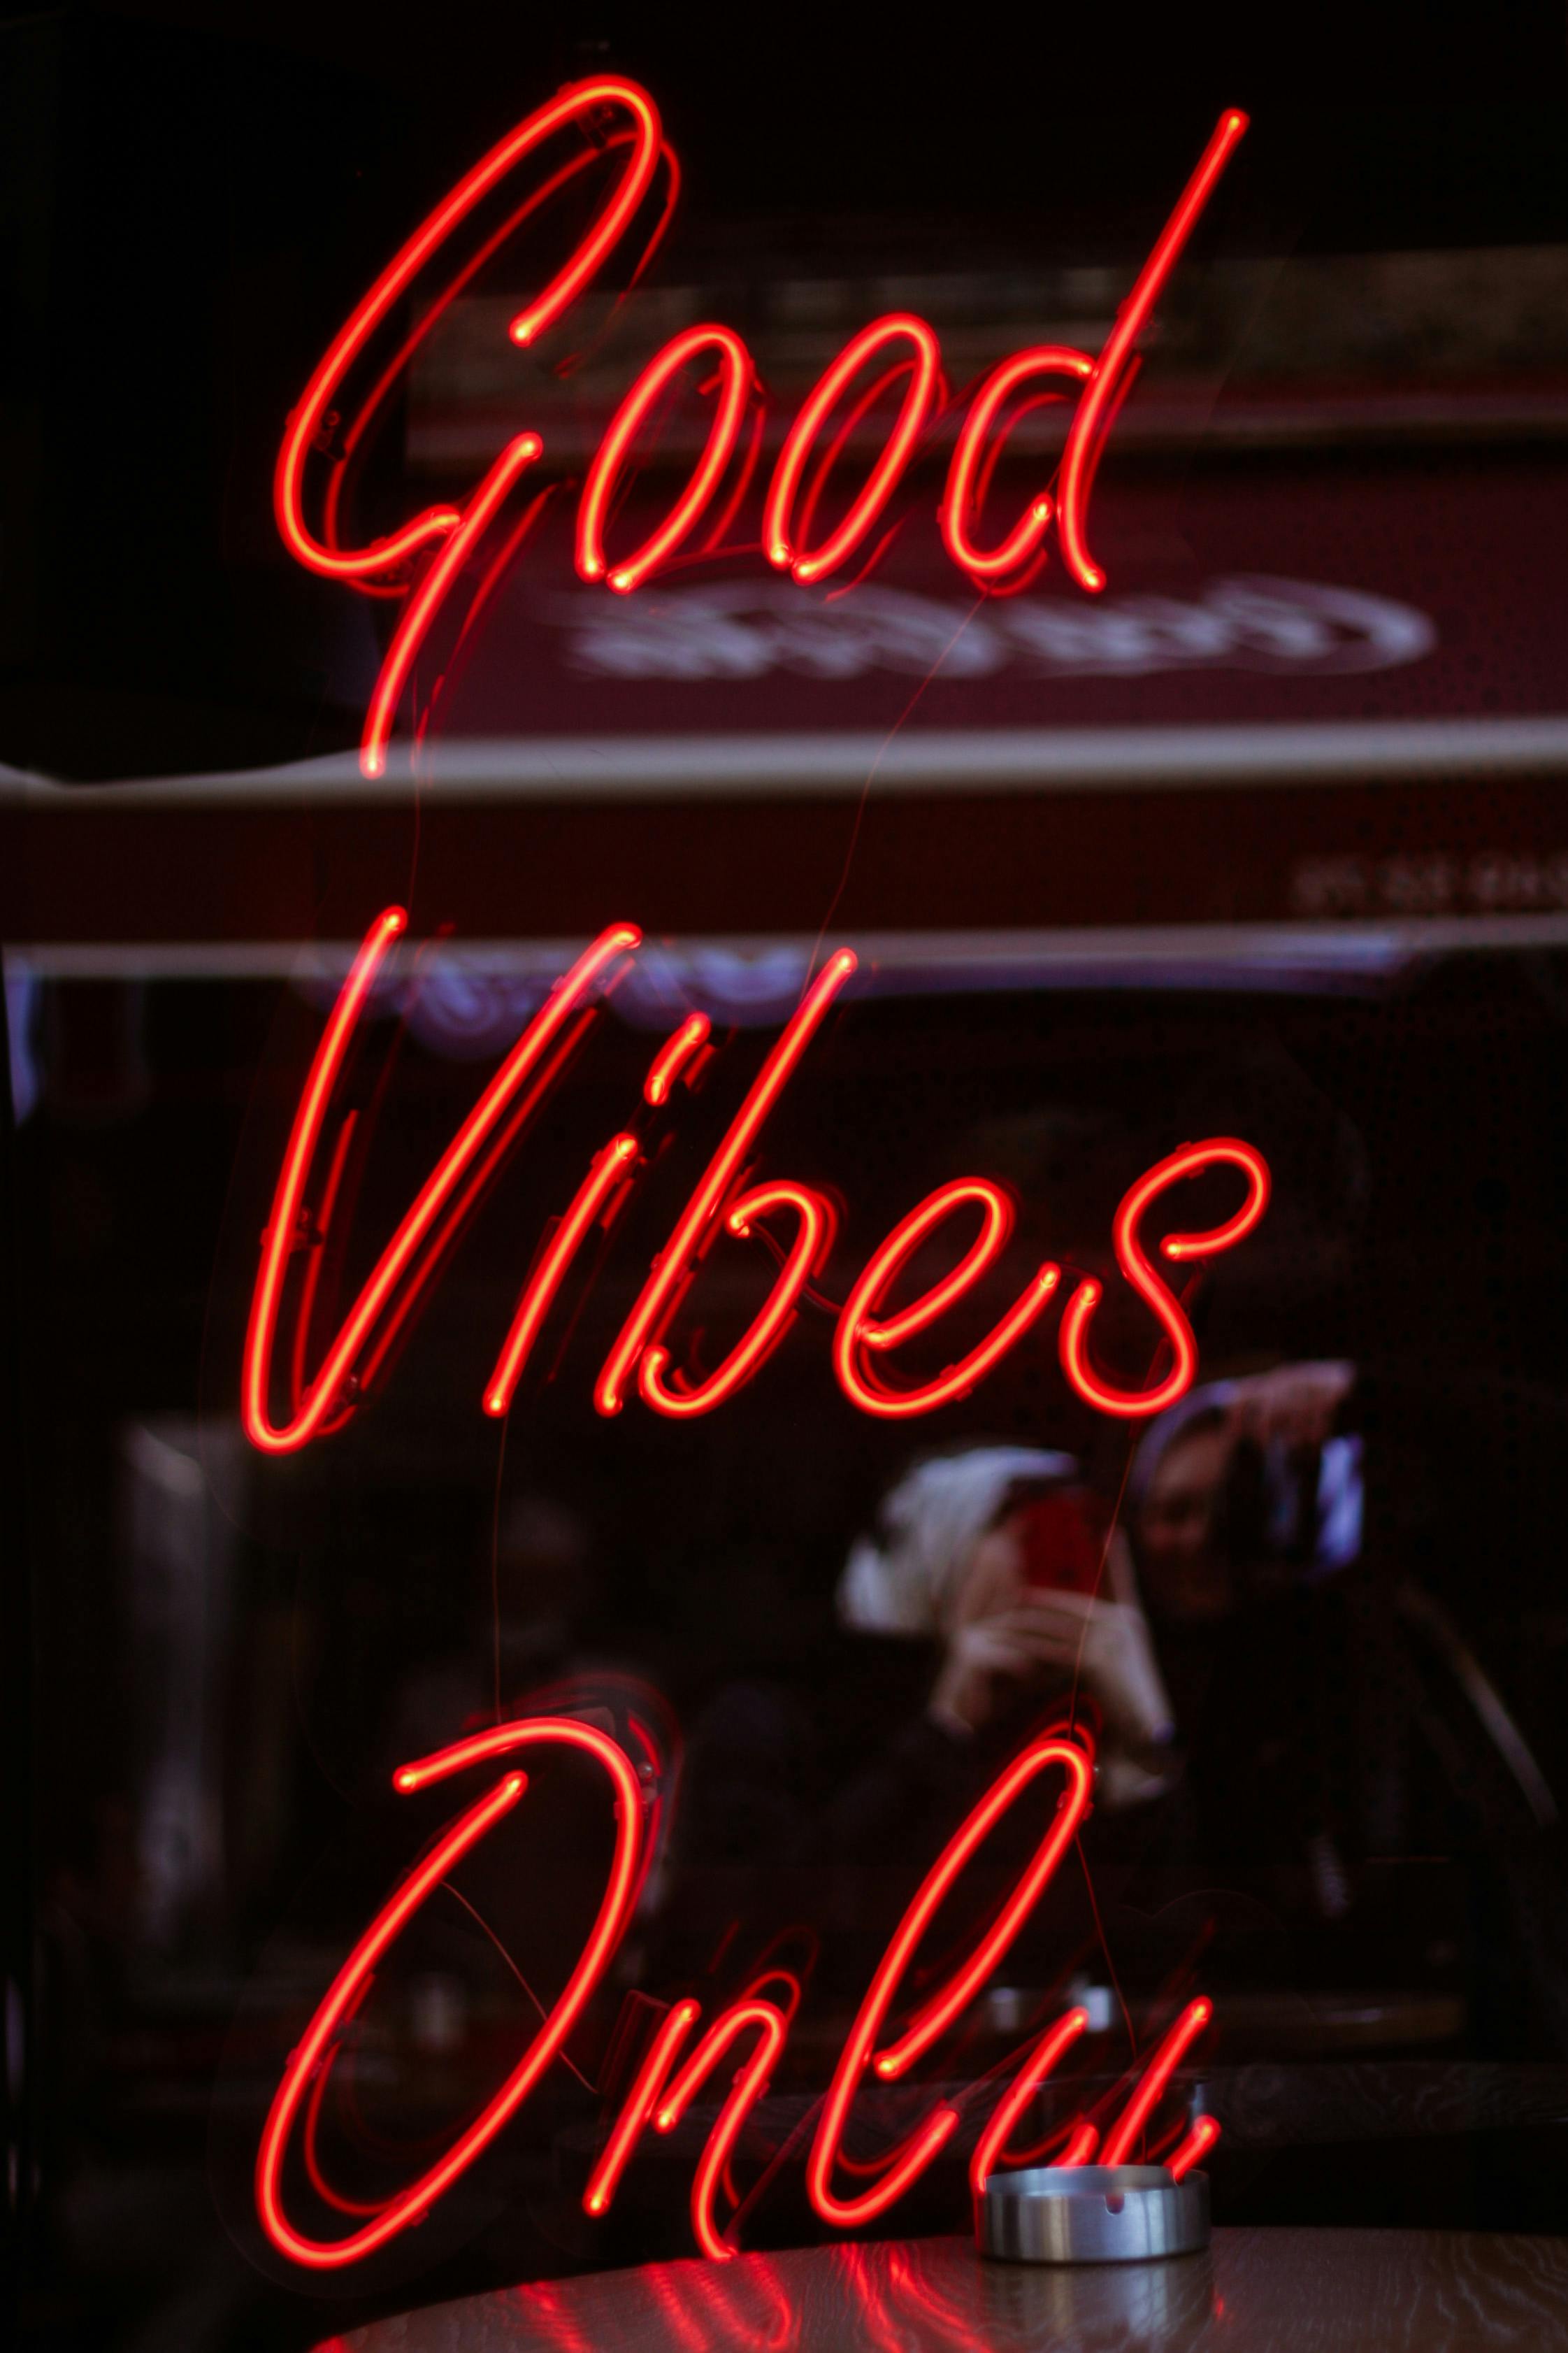 Neon Good Vibe Light Images  Free Photos PNG Stickers Wallpapers   Backgrounds  rawpixel